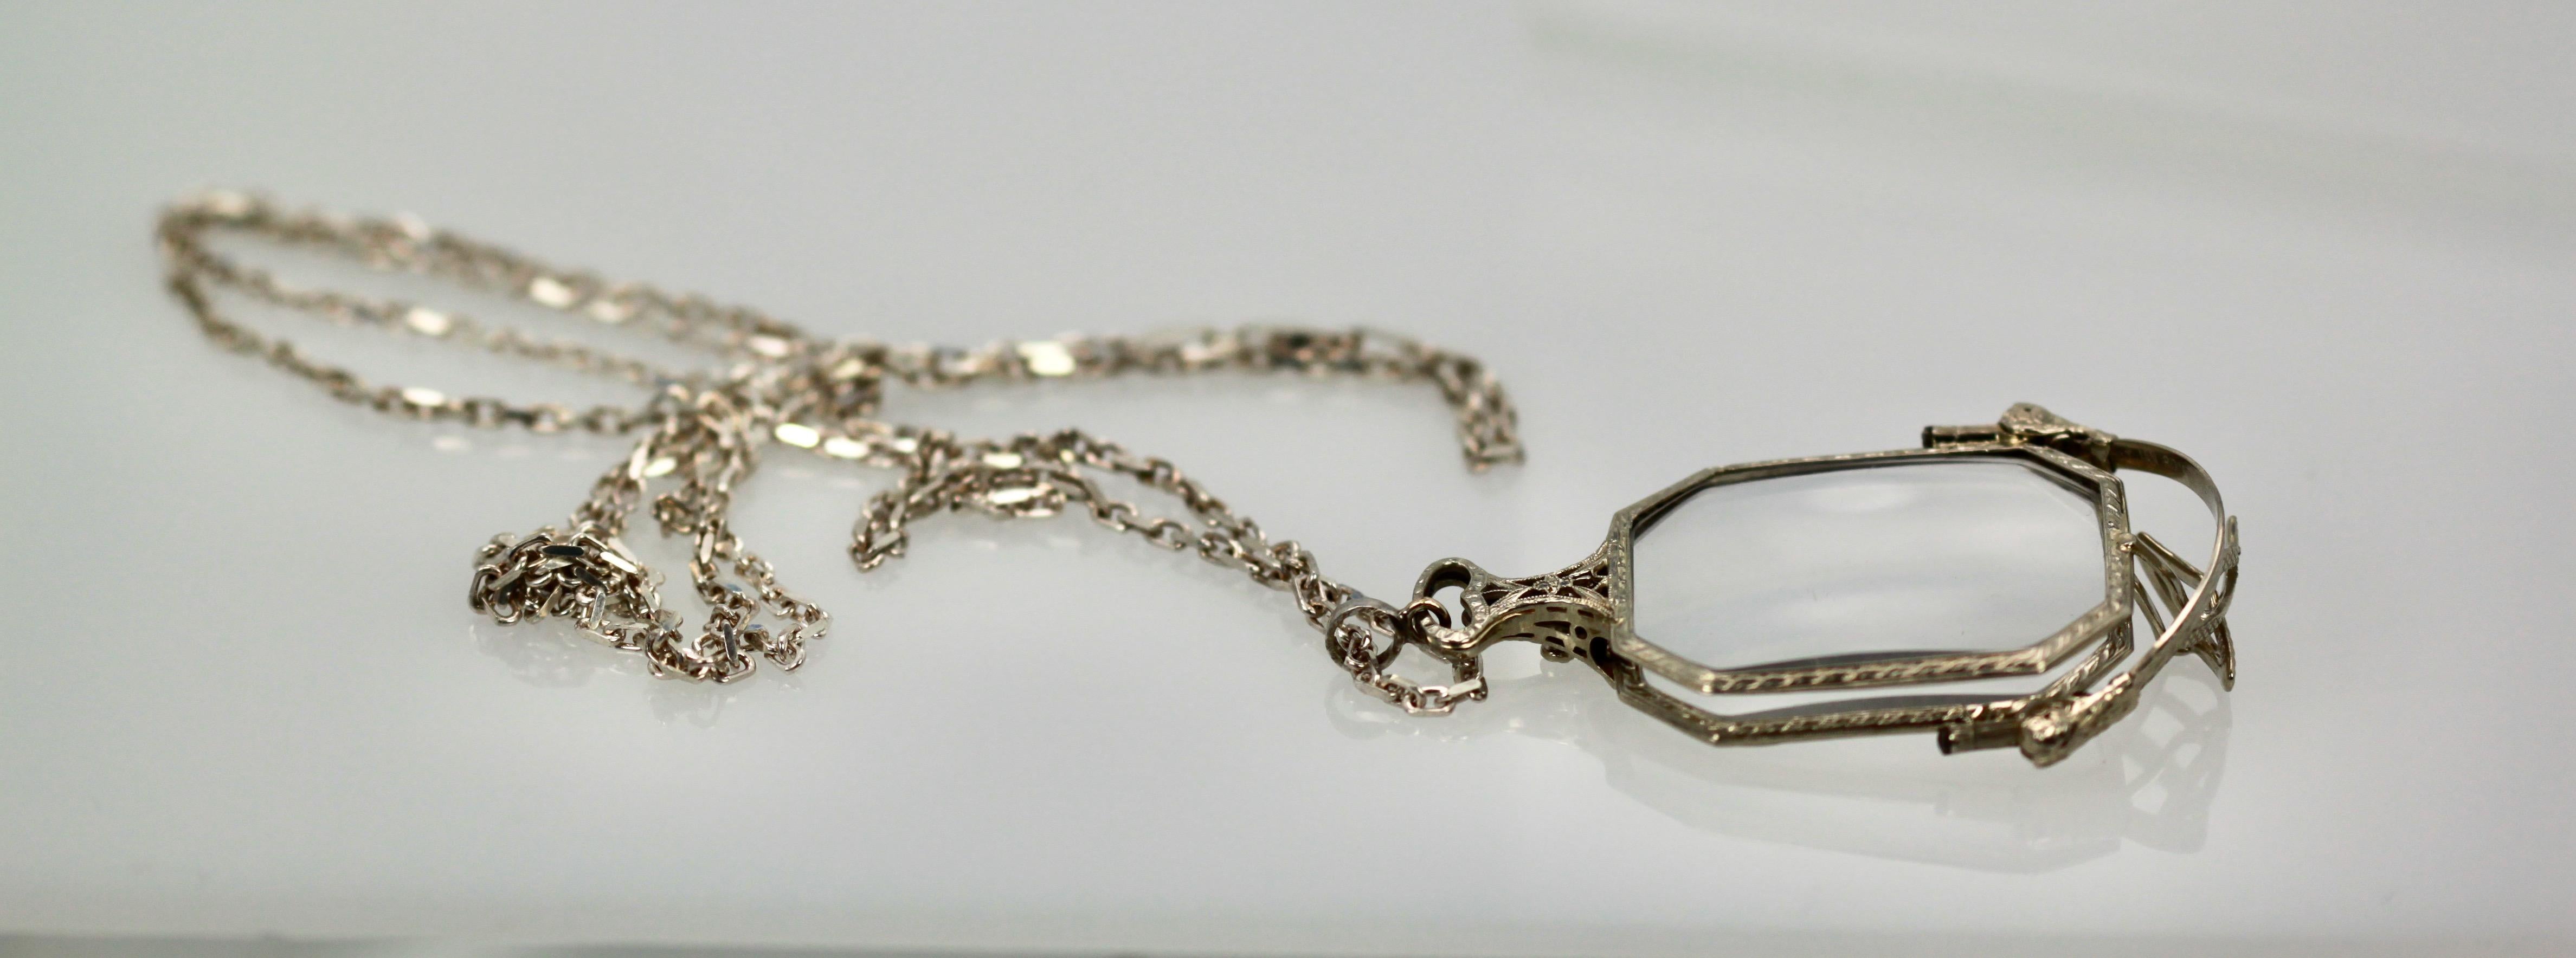 Art Deco 14K Lorgnette with Chain For Sale 6